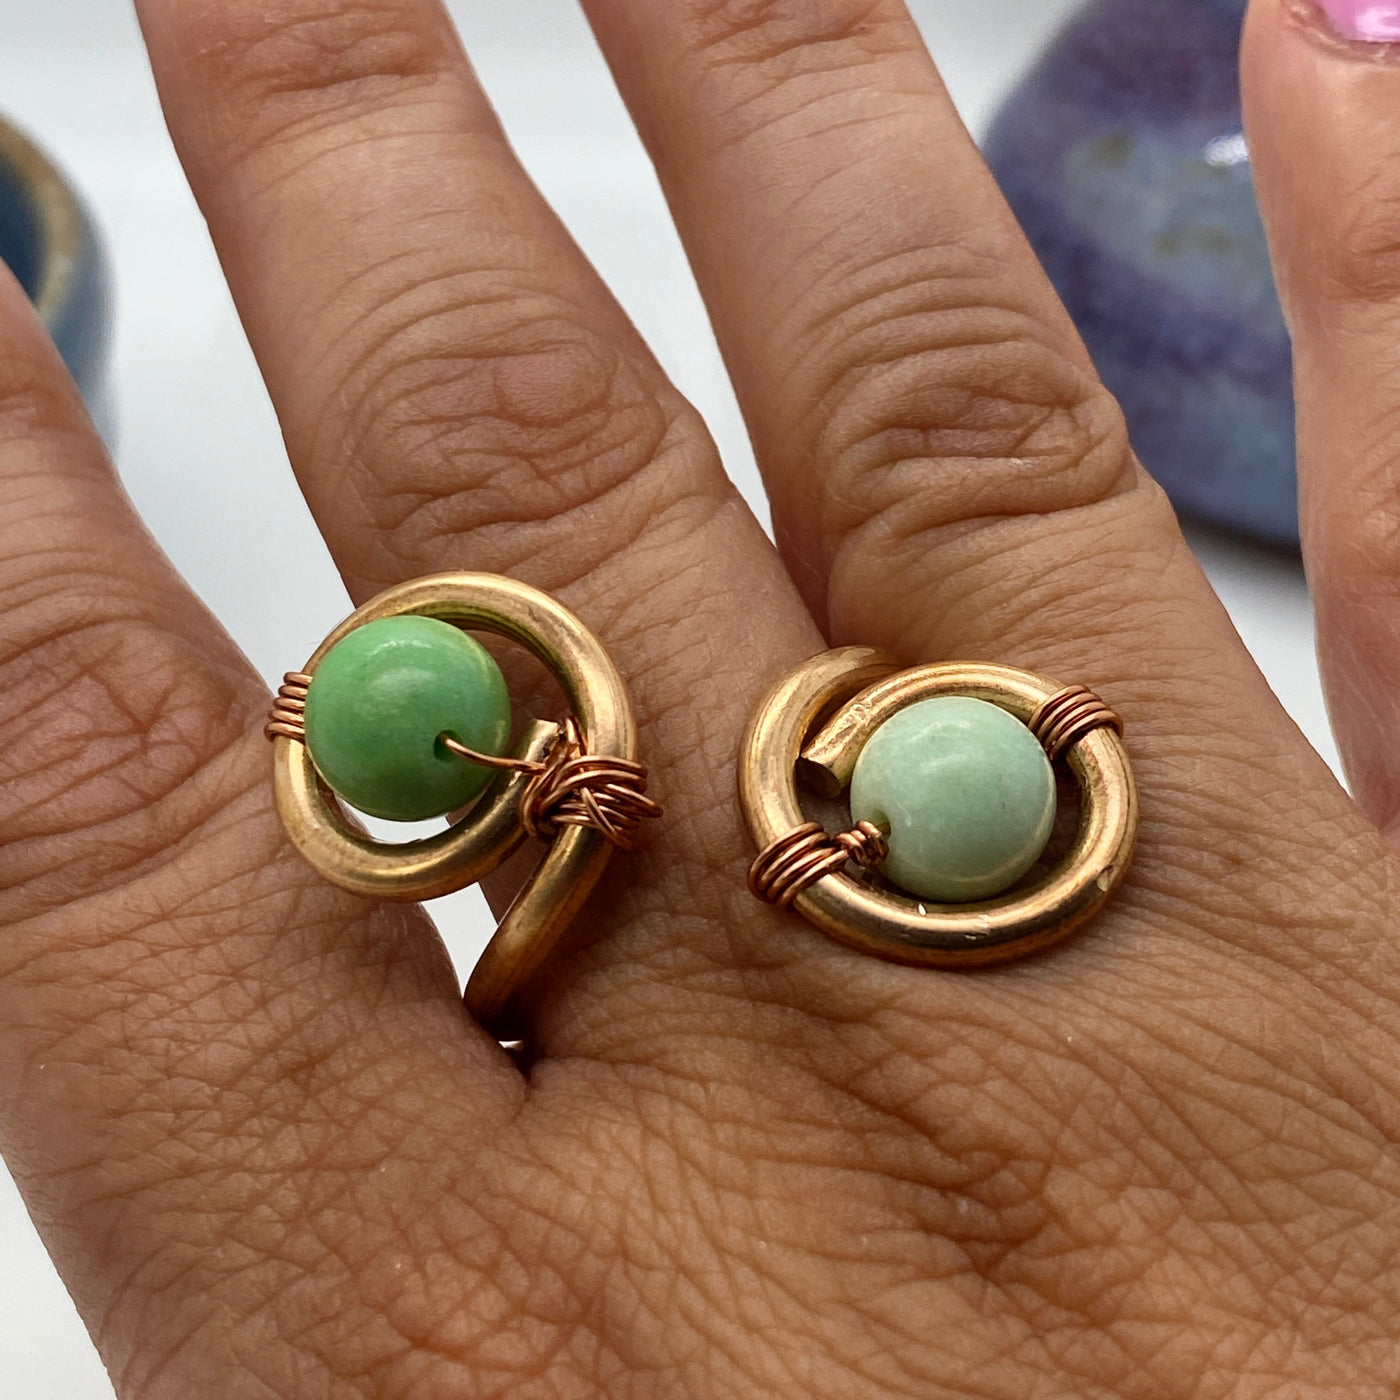 Yellow/green turquoise ring